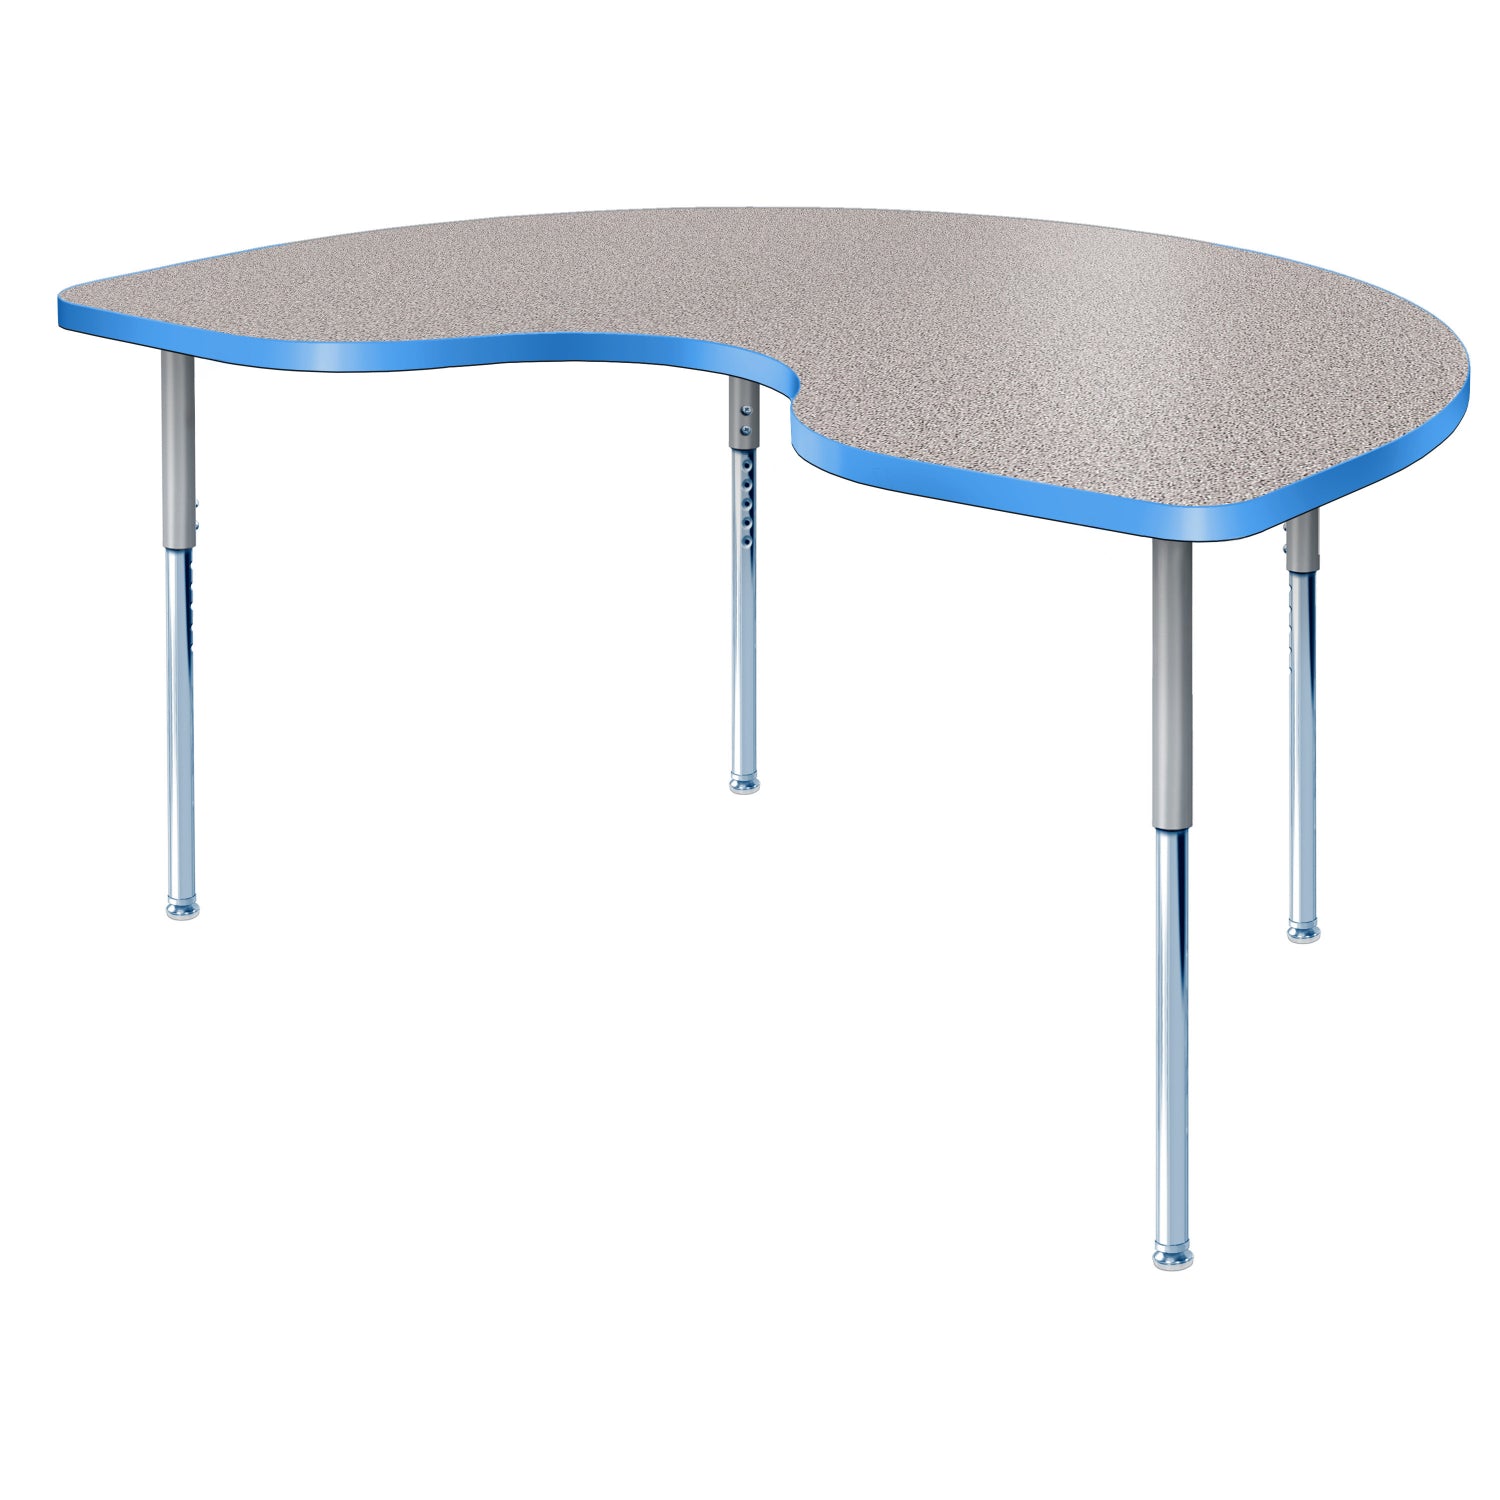 Modern Classic Series 36 x 72" Kidney Activity Table with High Pressure Laminate Top, Adjustable Height Legs